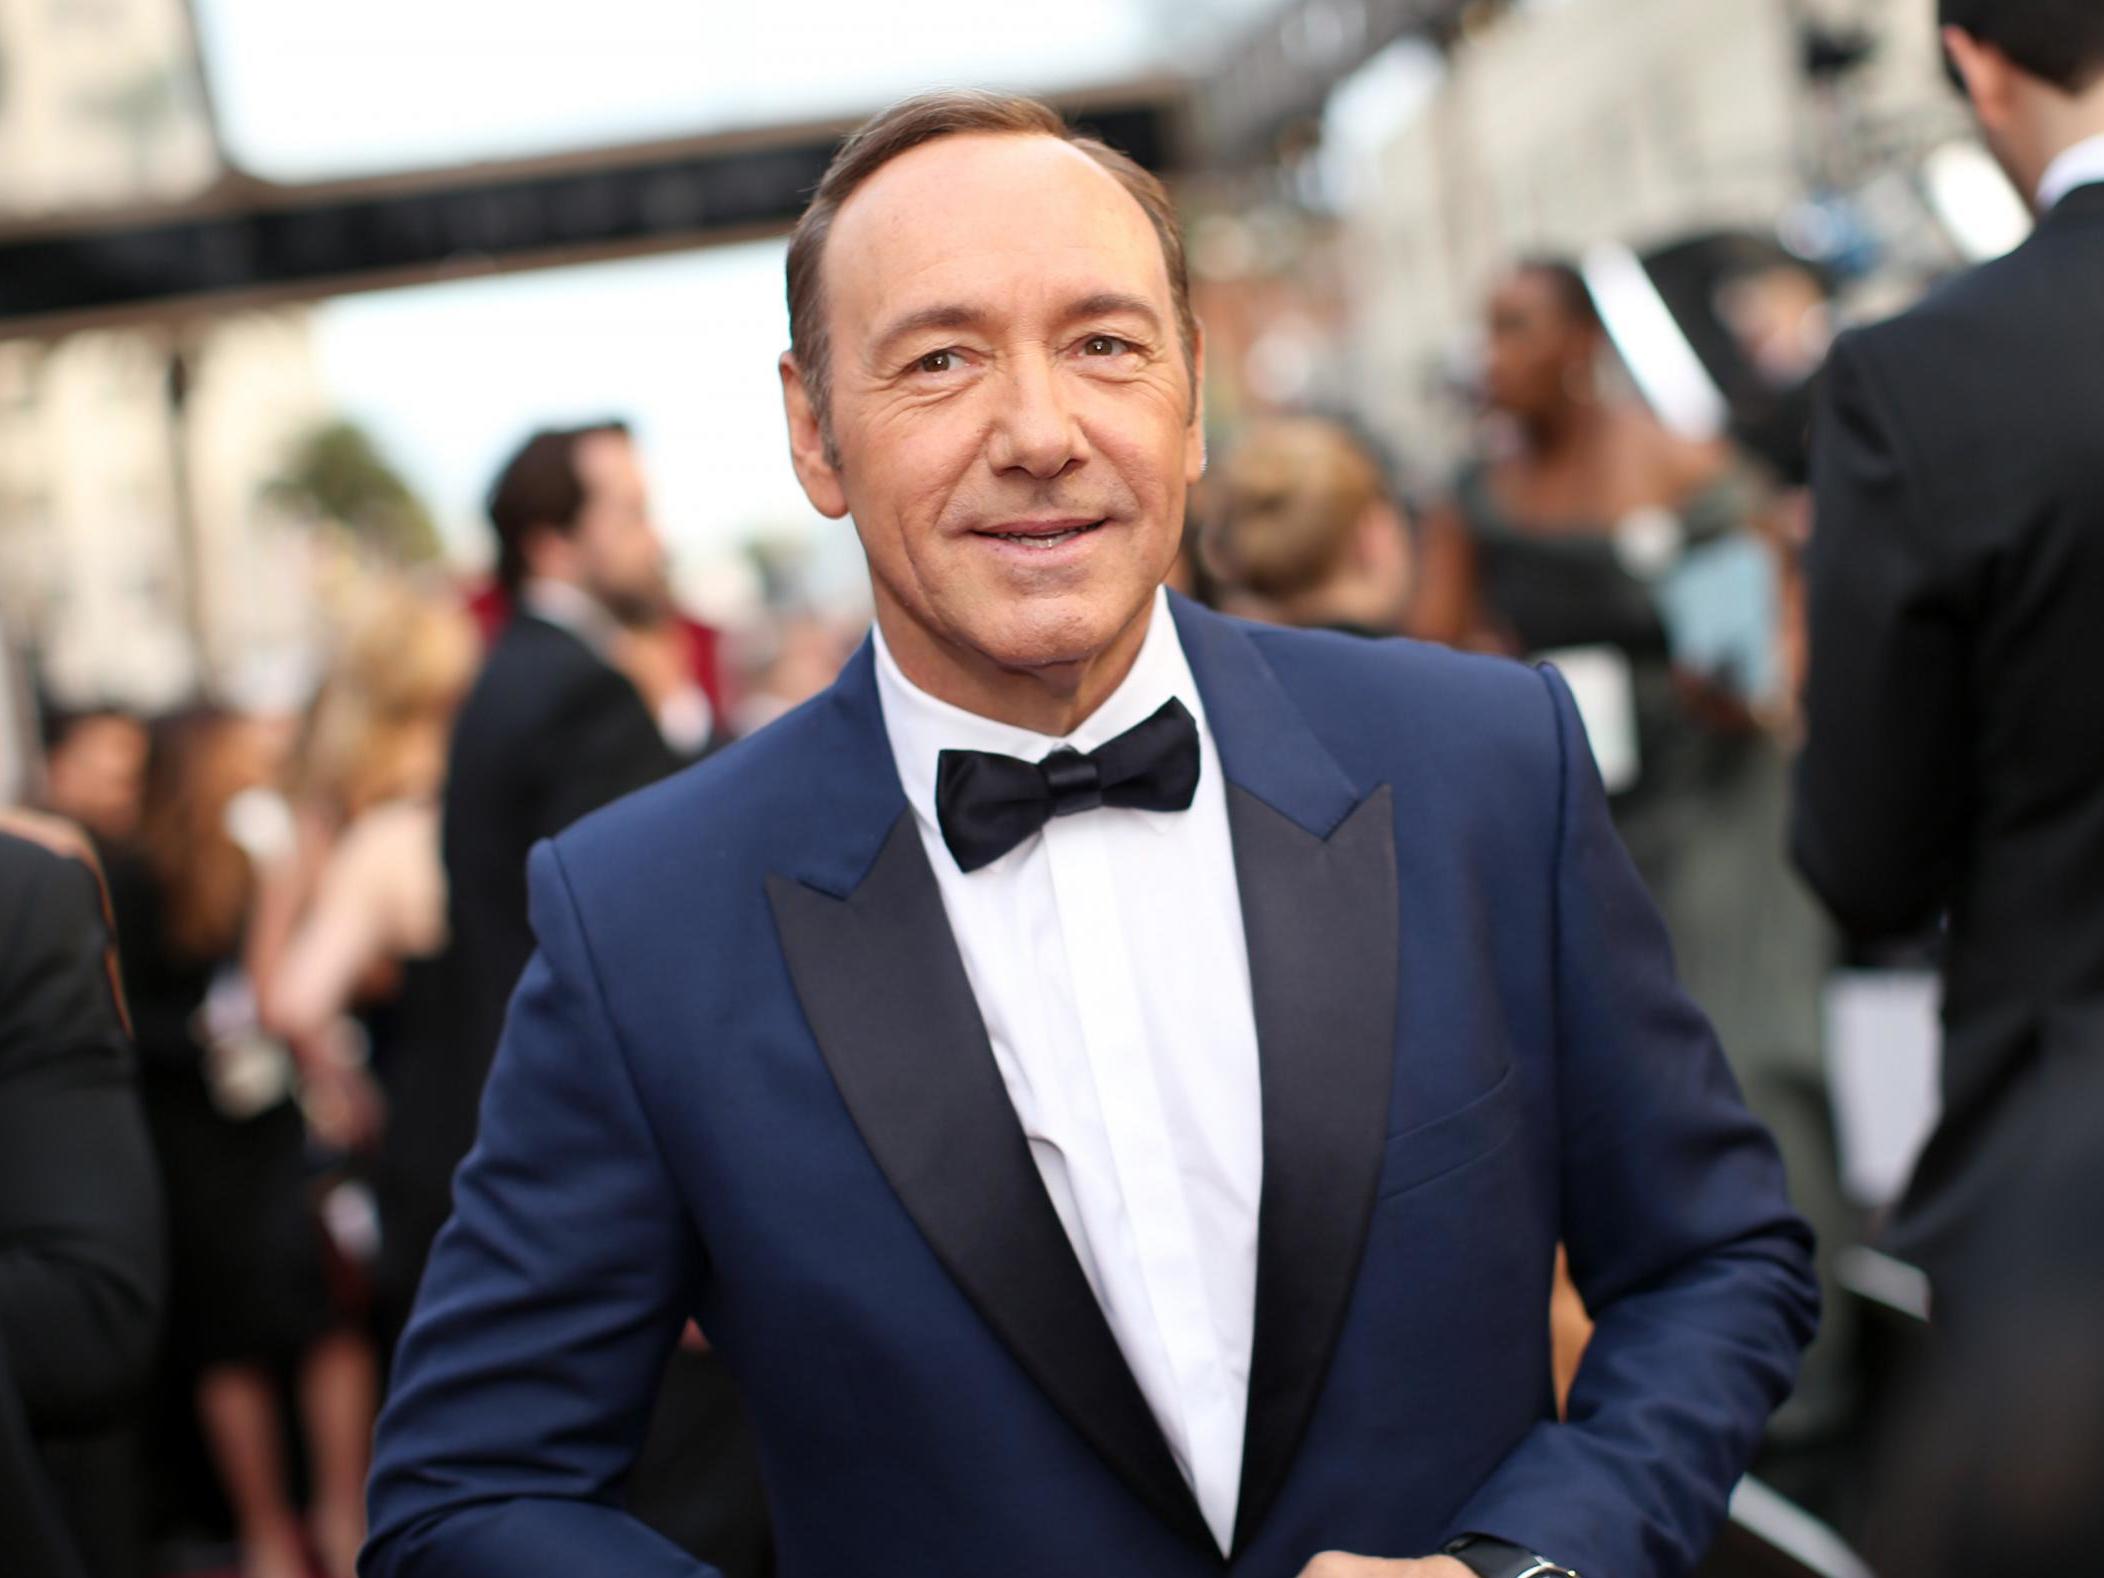 Related video: Kevin Spacey pleads not guilty to groping charge